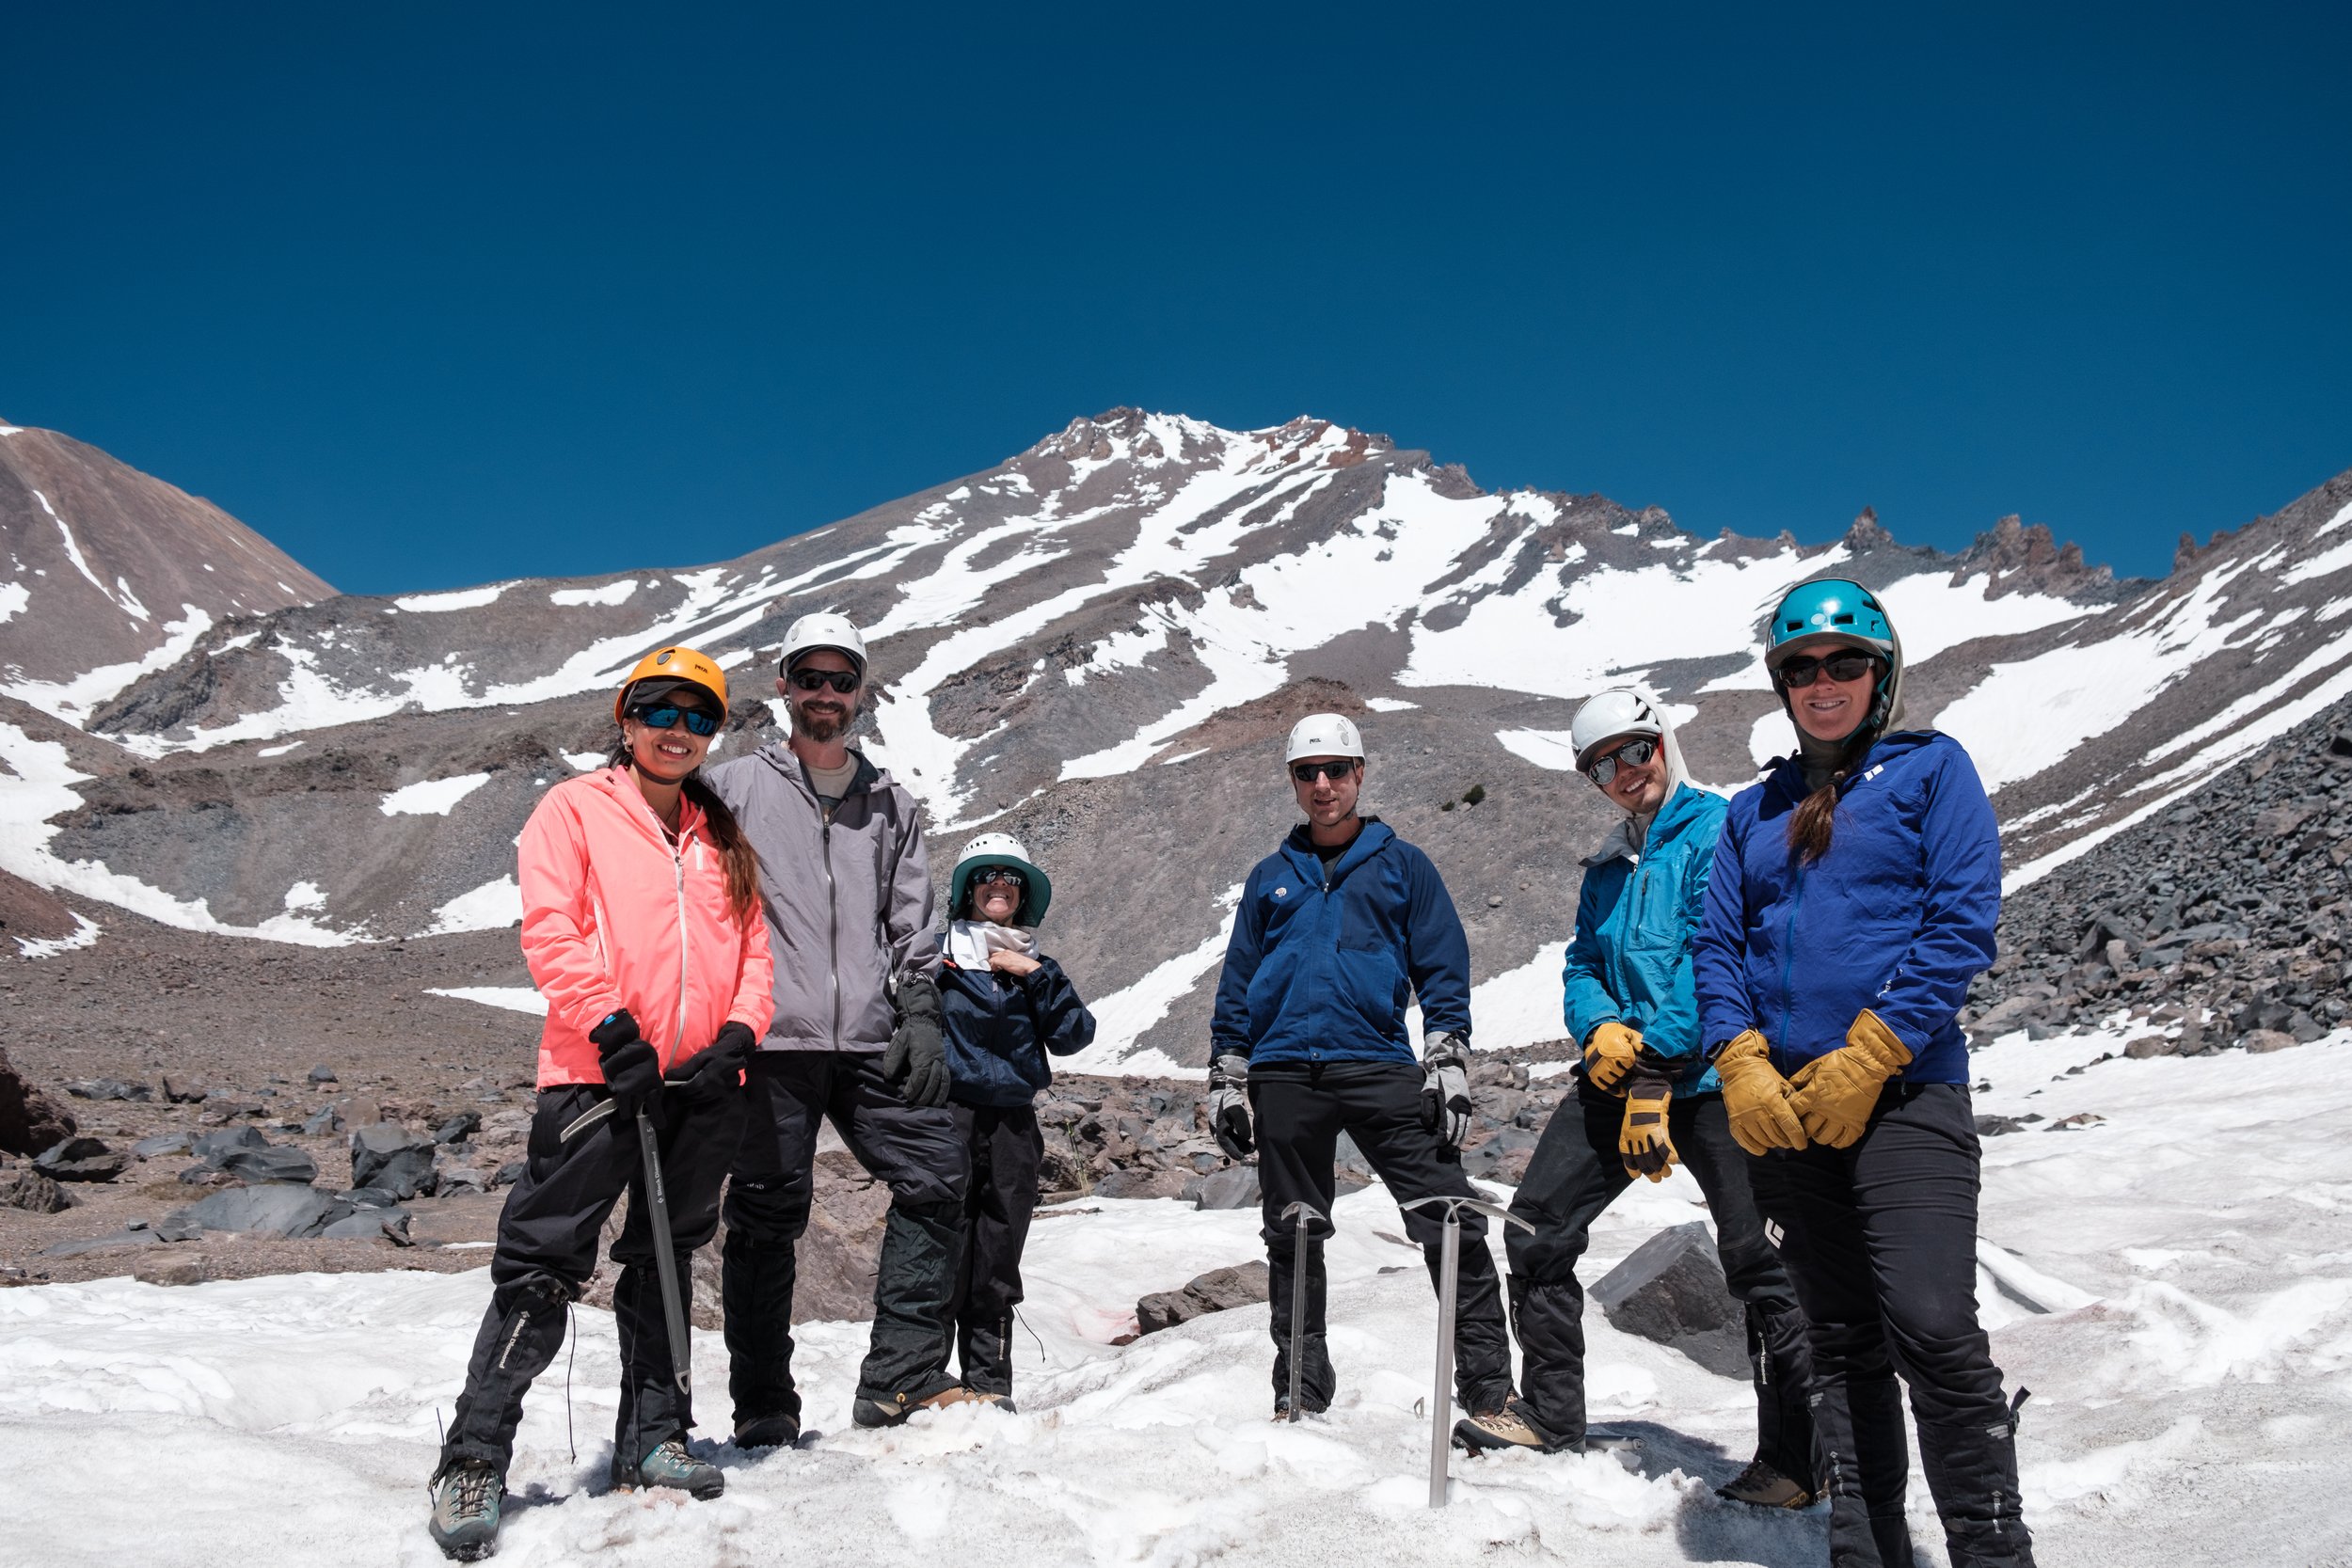 Mountaineering group poses at 50/50 base camp